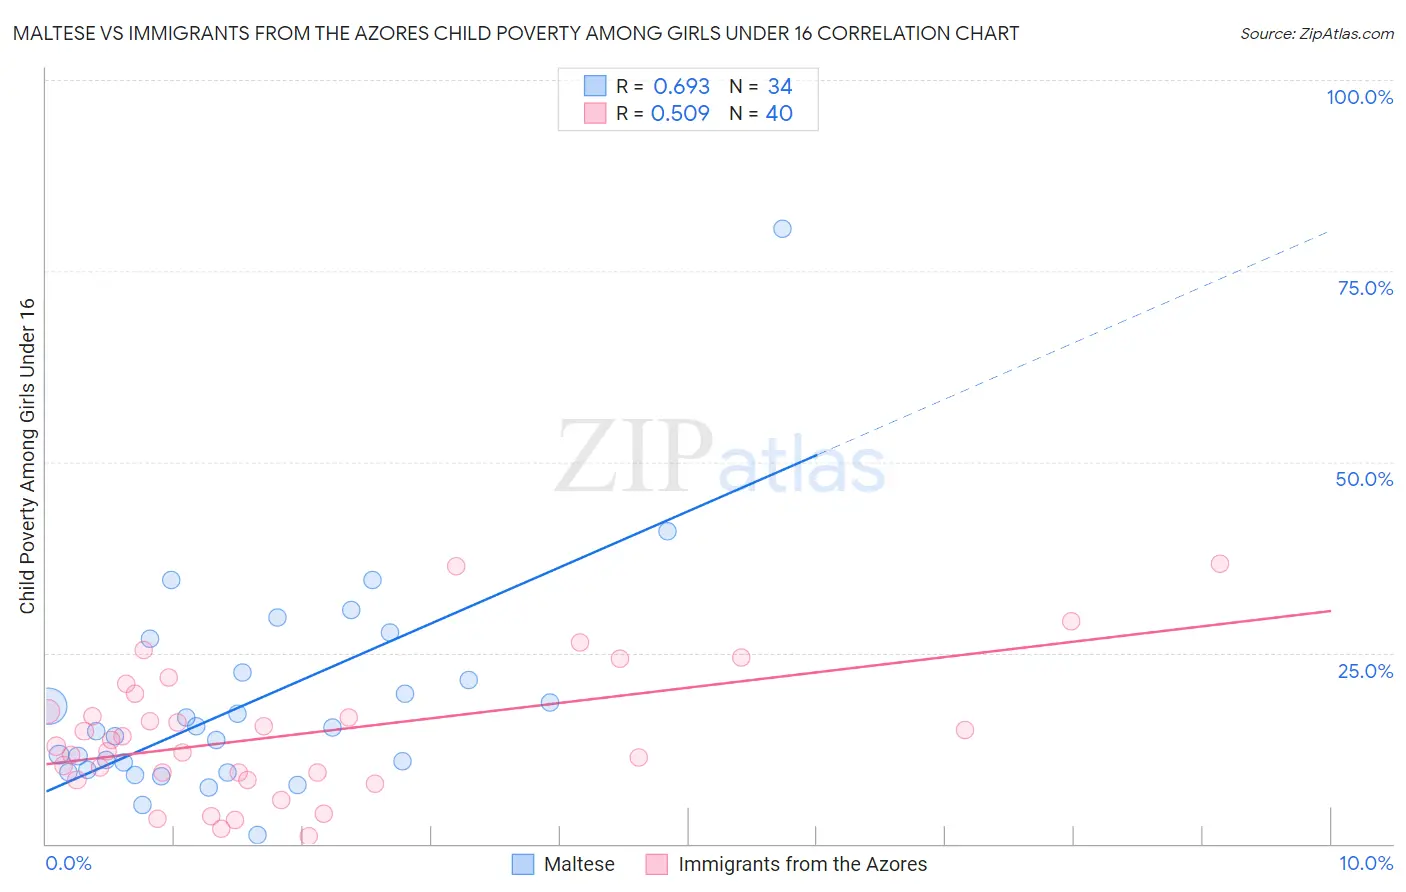 Maltese vs Immigrants from the Azores Child Poverty Among Girls Under 16